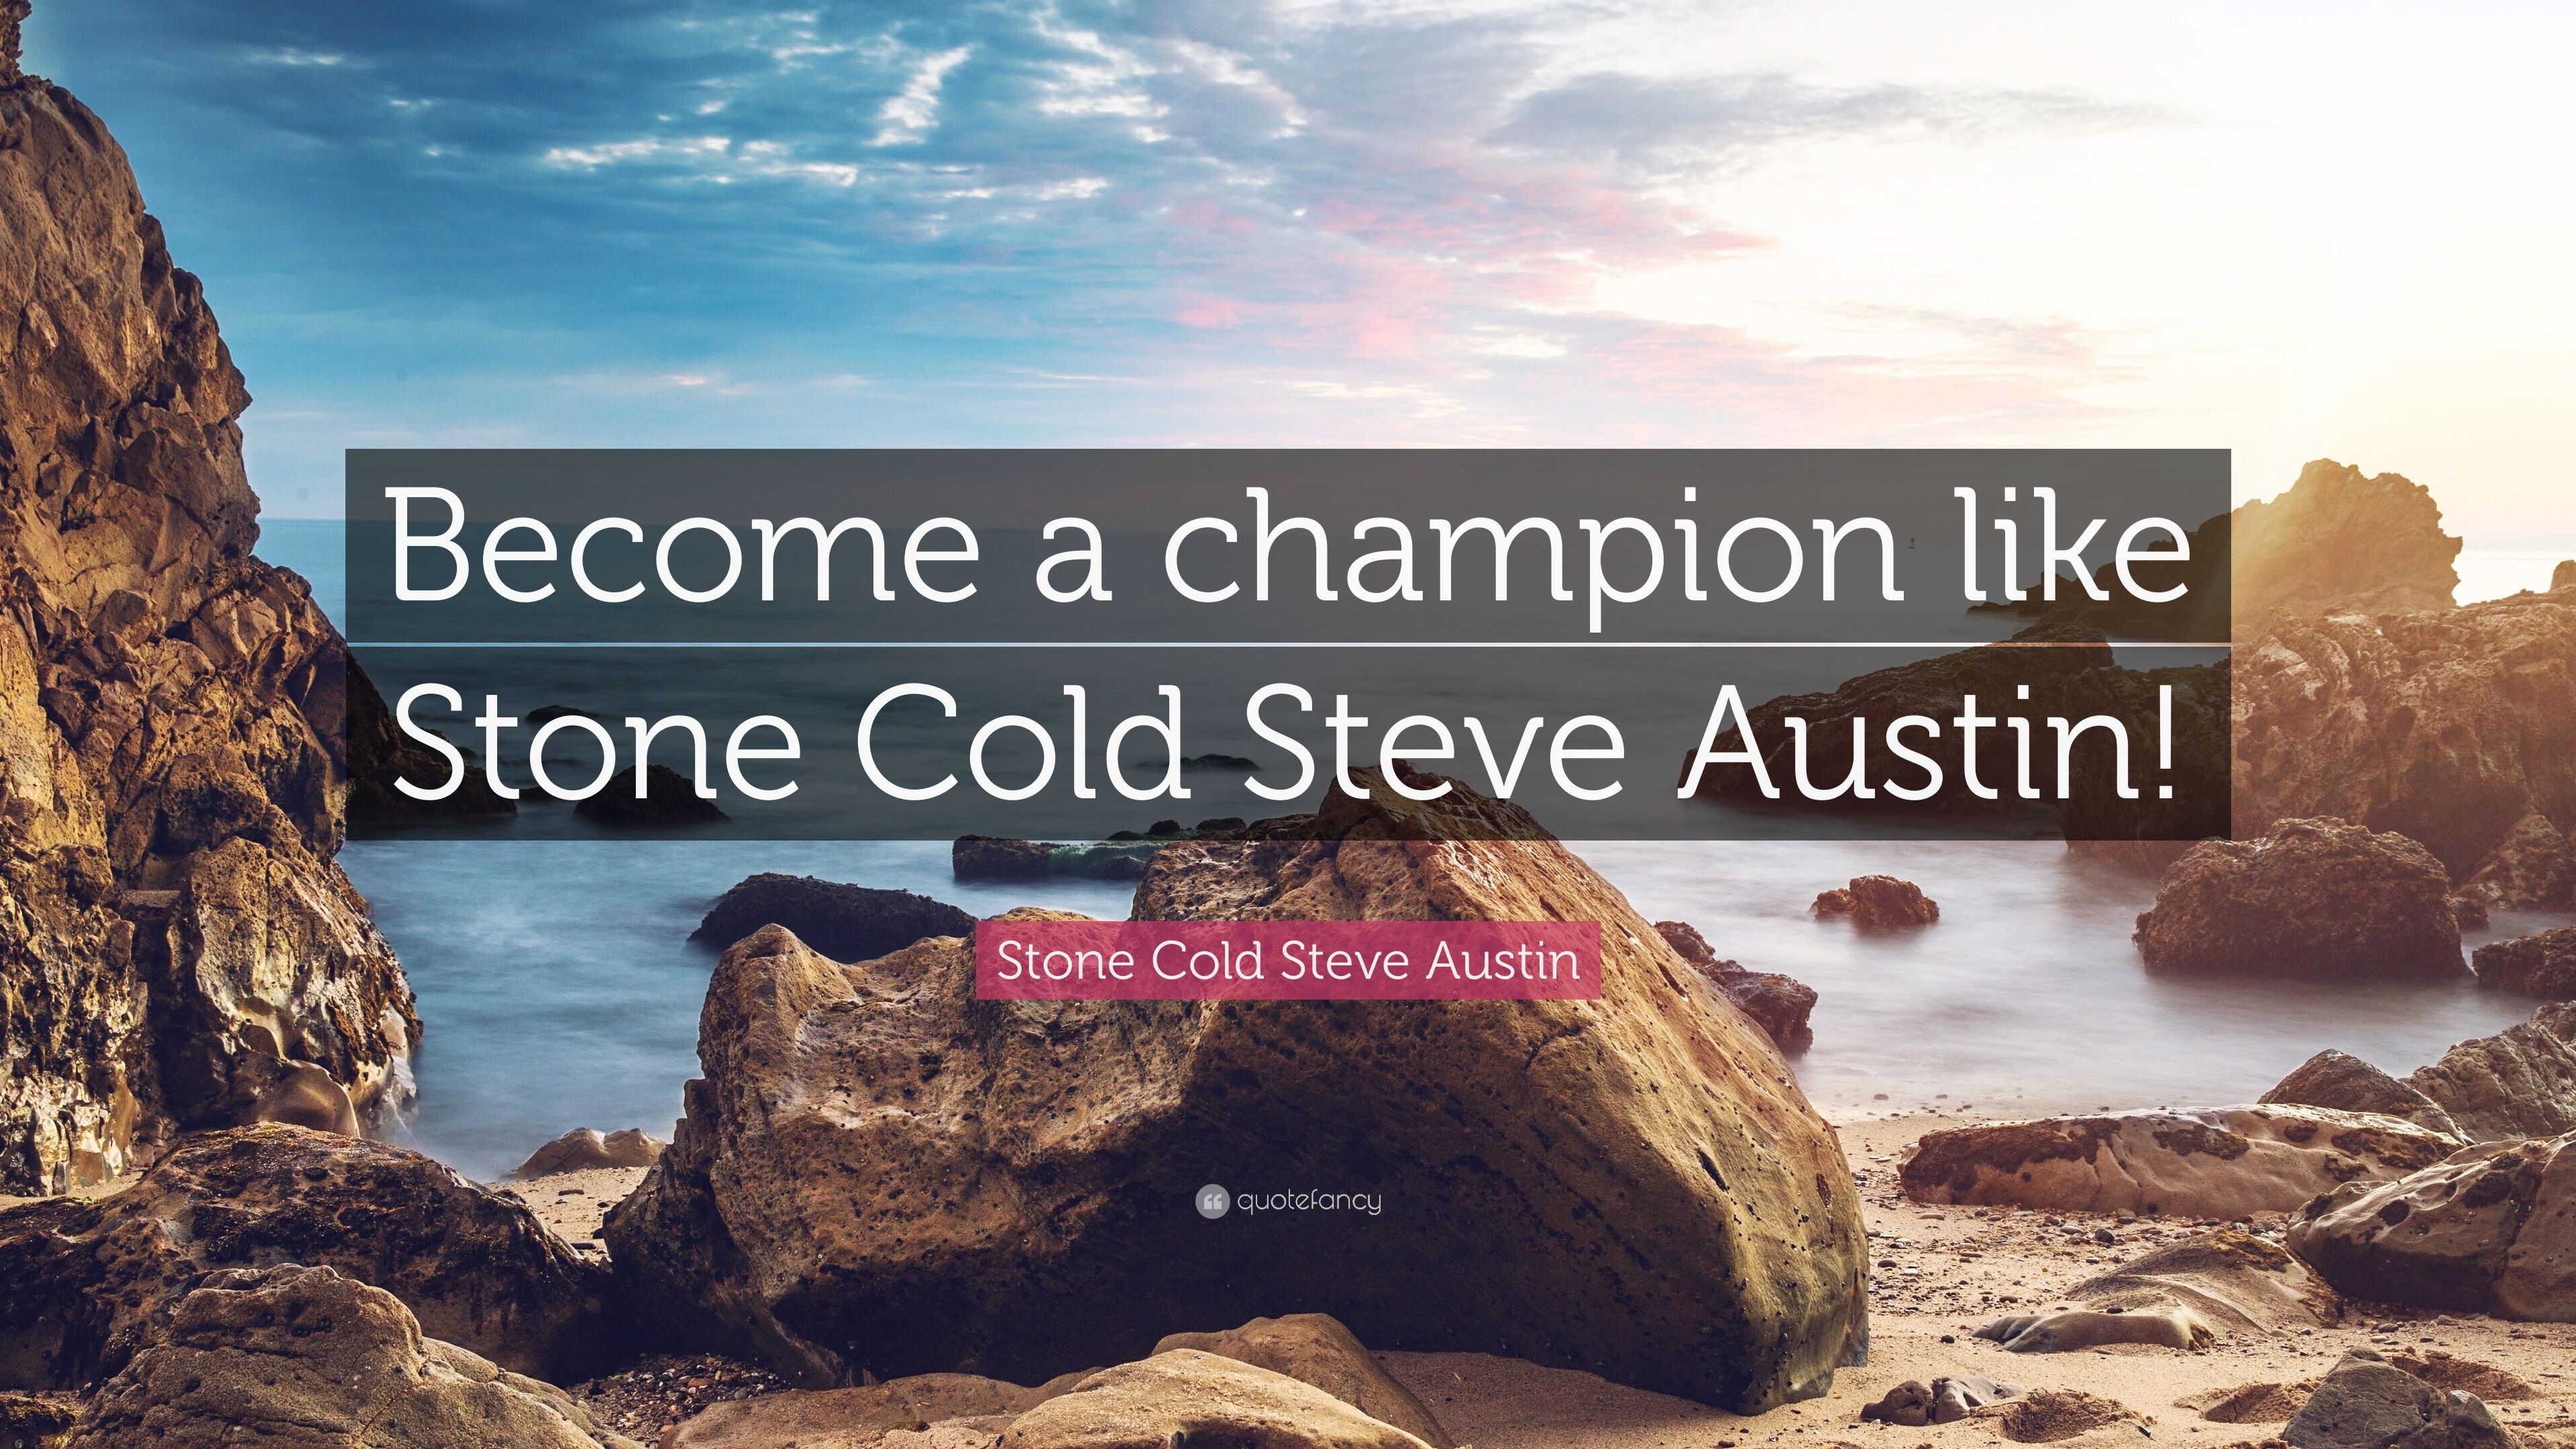 Stone Cold Steve Austin Quote: “Become a champion like Stone Cold